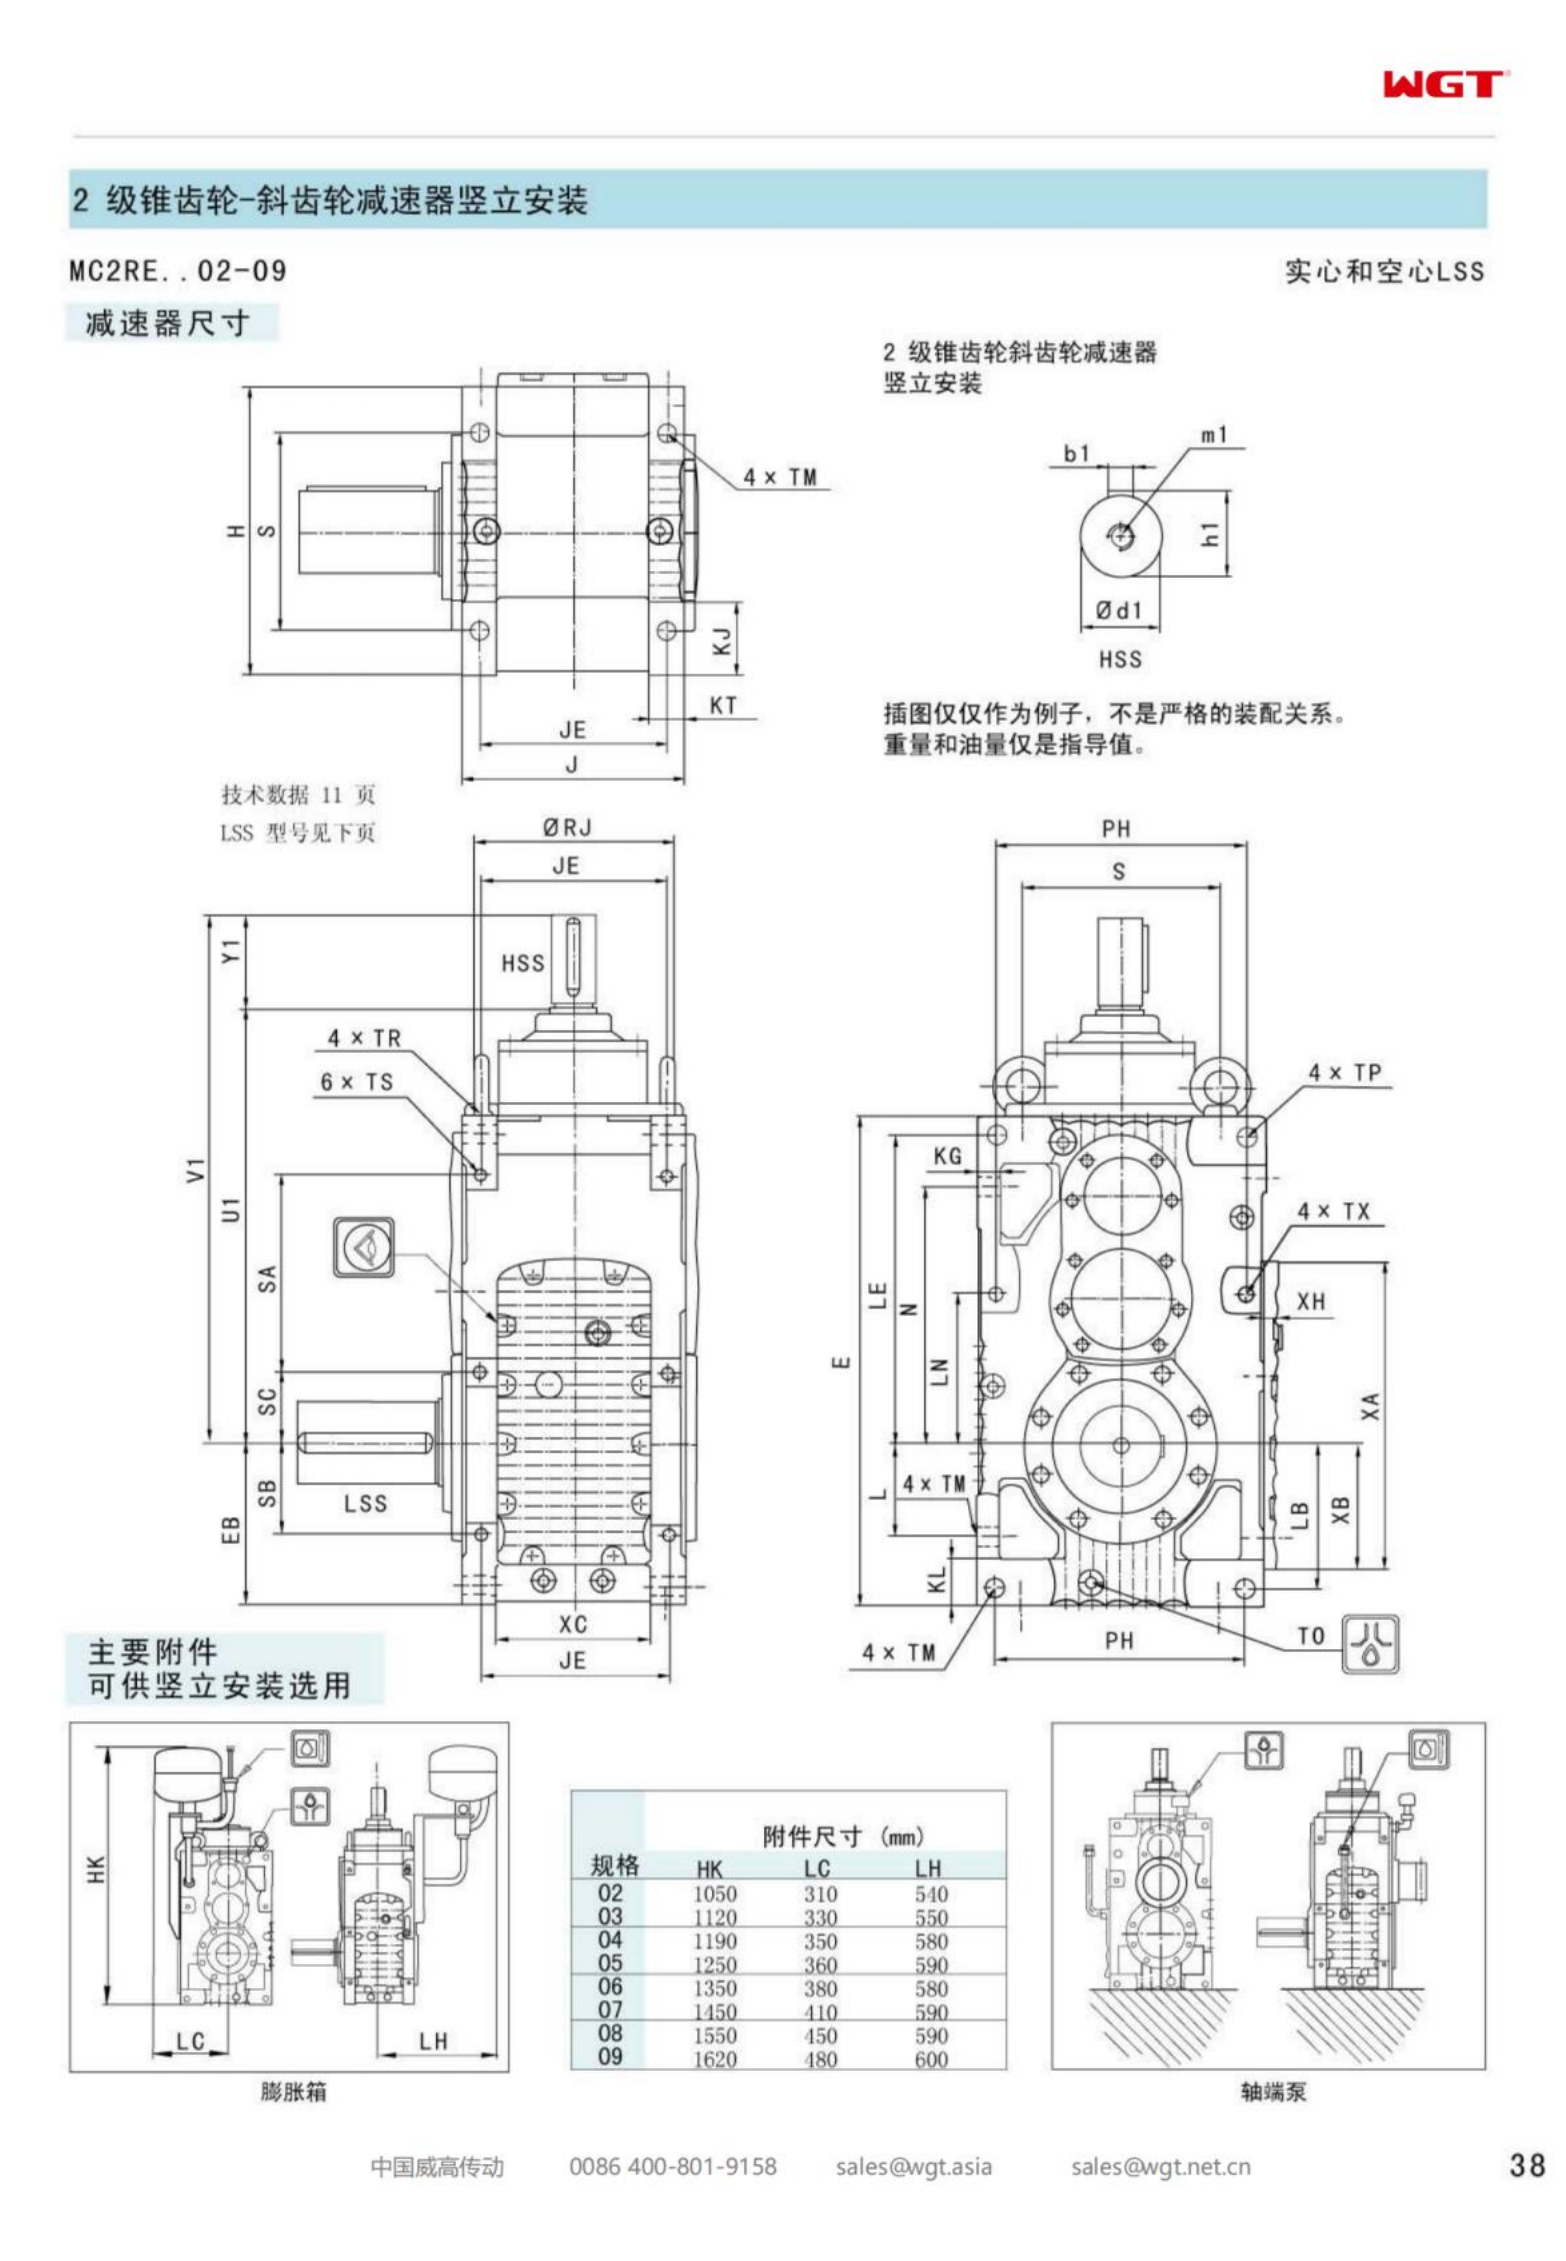 MC2RESF09 Replace_SEW_MC_Series Gearbox